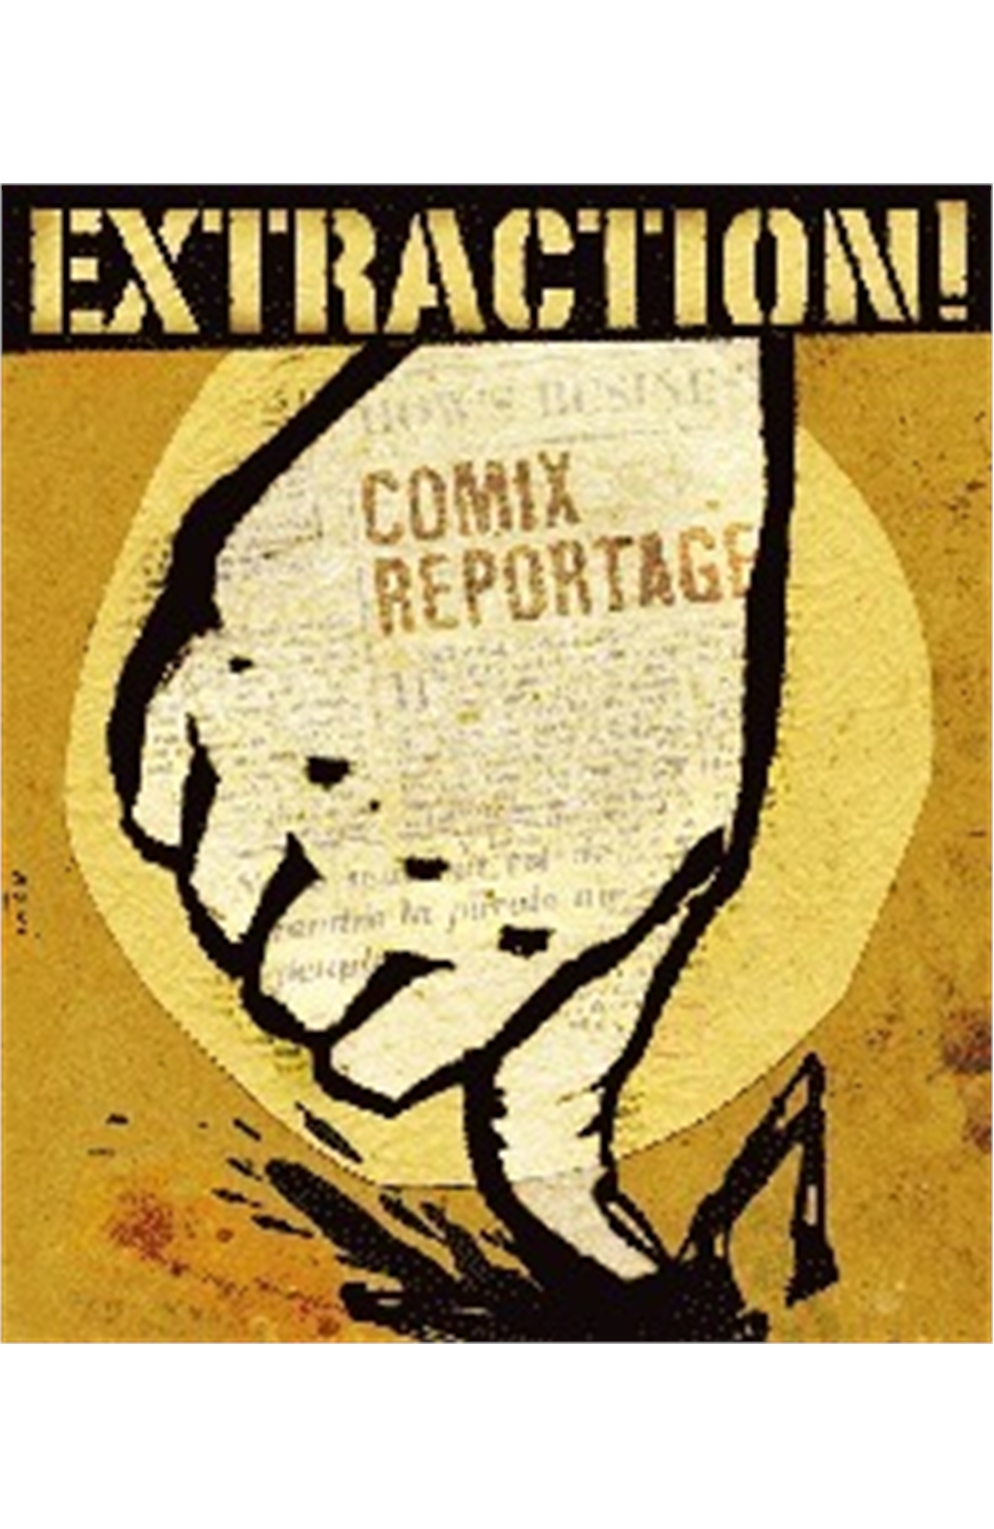 Extraction!